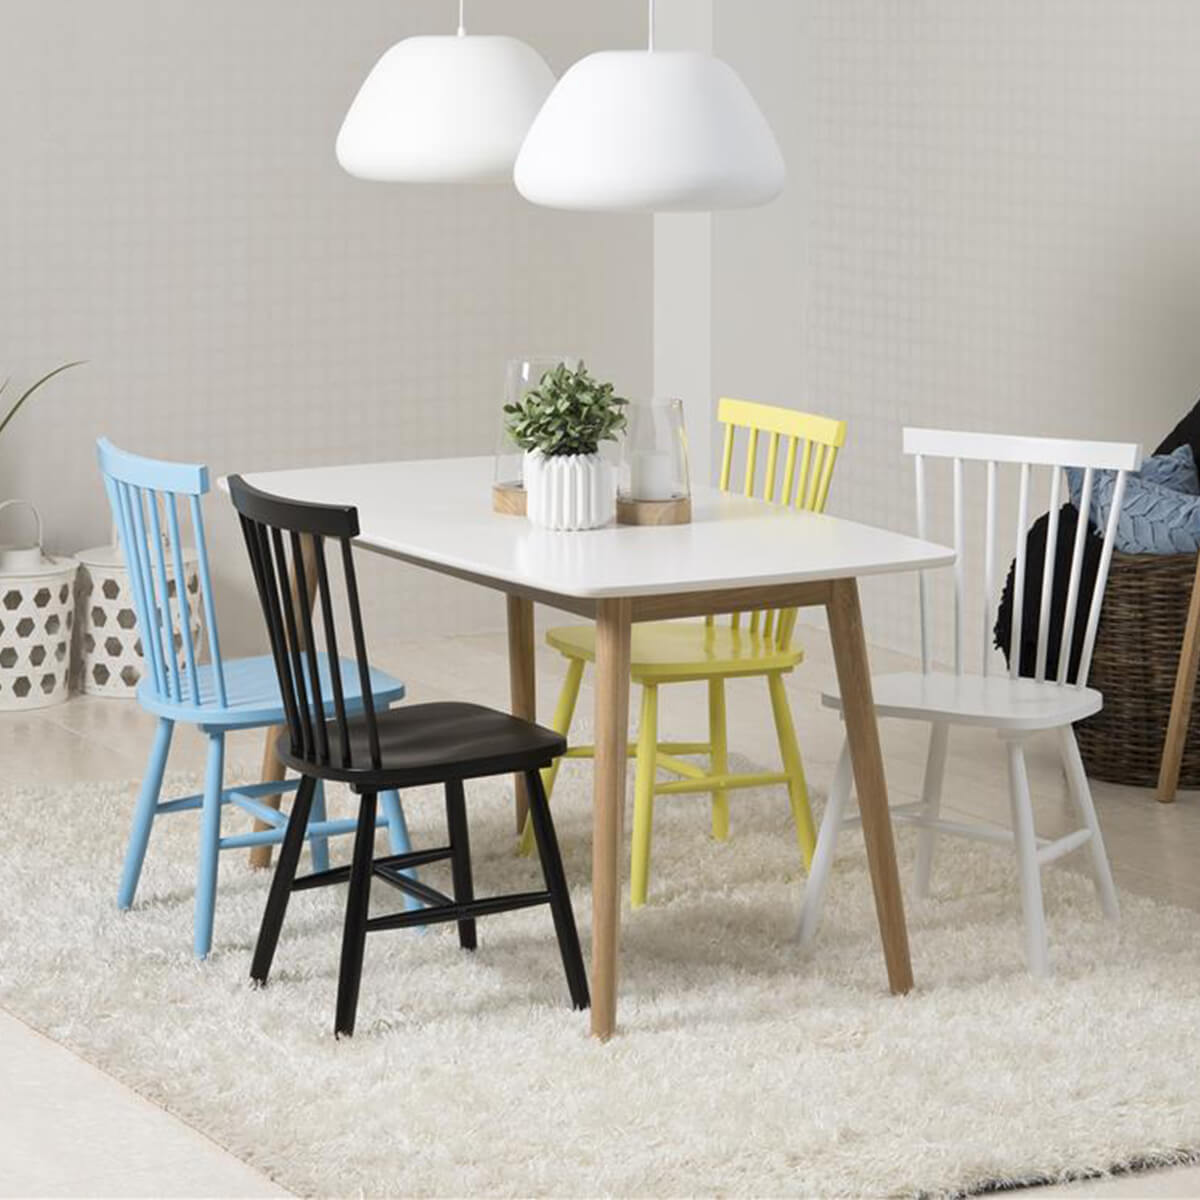 Nagano Scandi  Style Dining Set with Coloured Chairs 